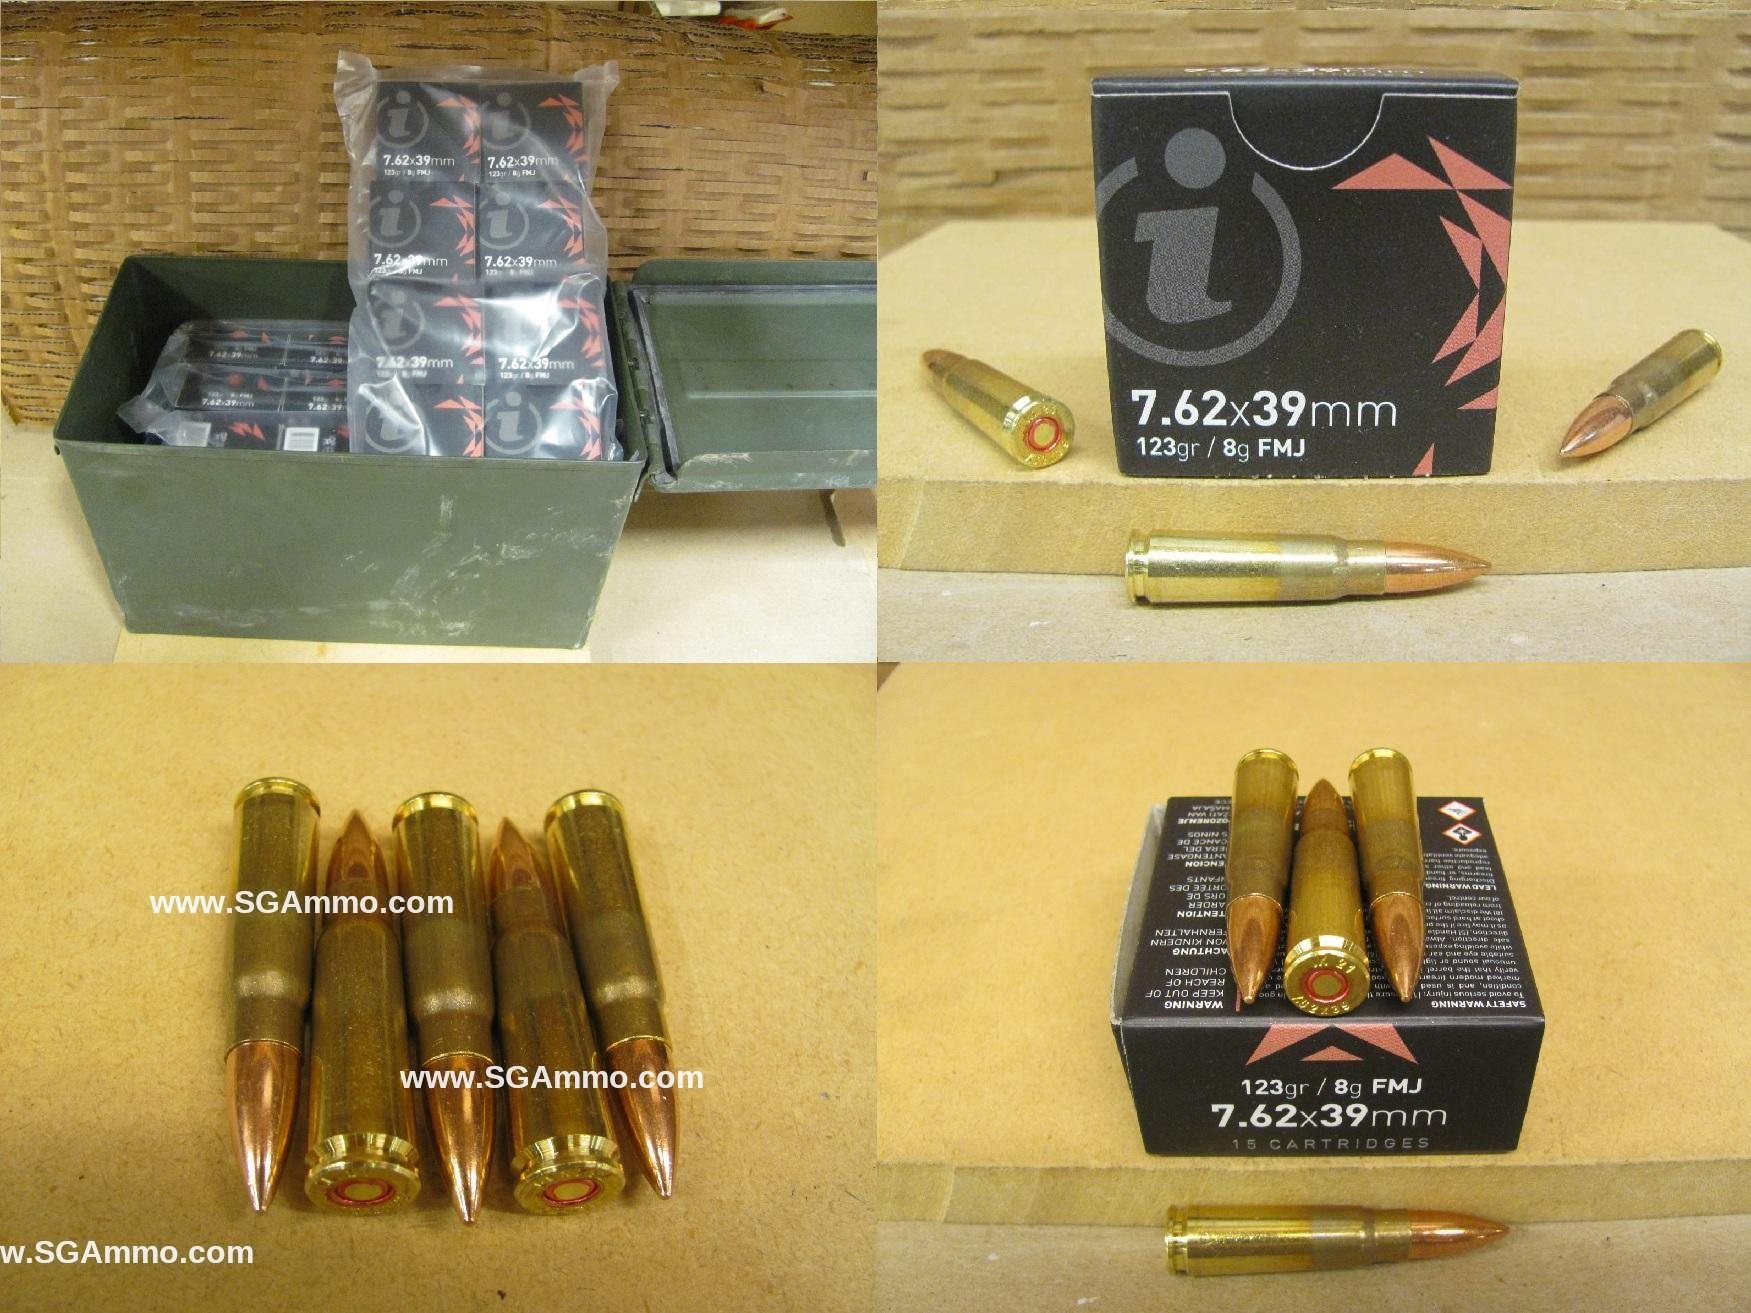 600 Rounds in Ammo Can - 7.62x39 123 Grain FMJ Brass Case Boxer Primed Non-Magnetic Ammunition Made by Igman Packed in Used Ammo Canister